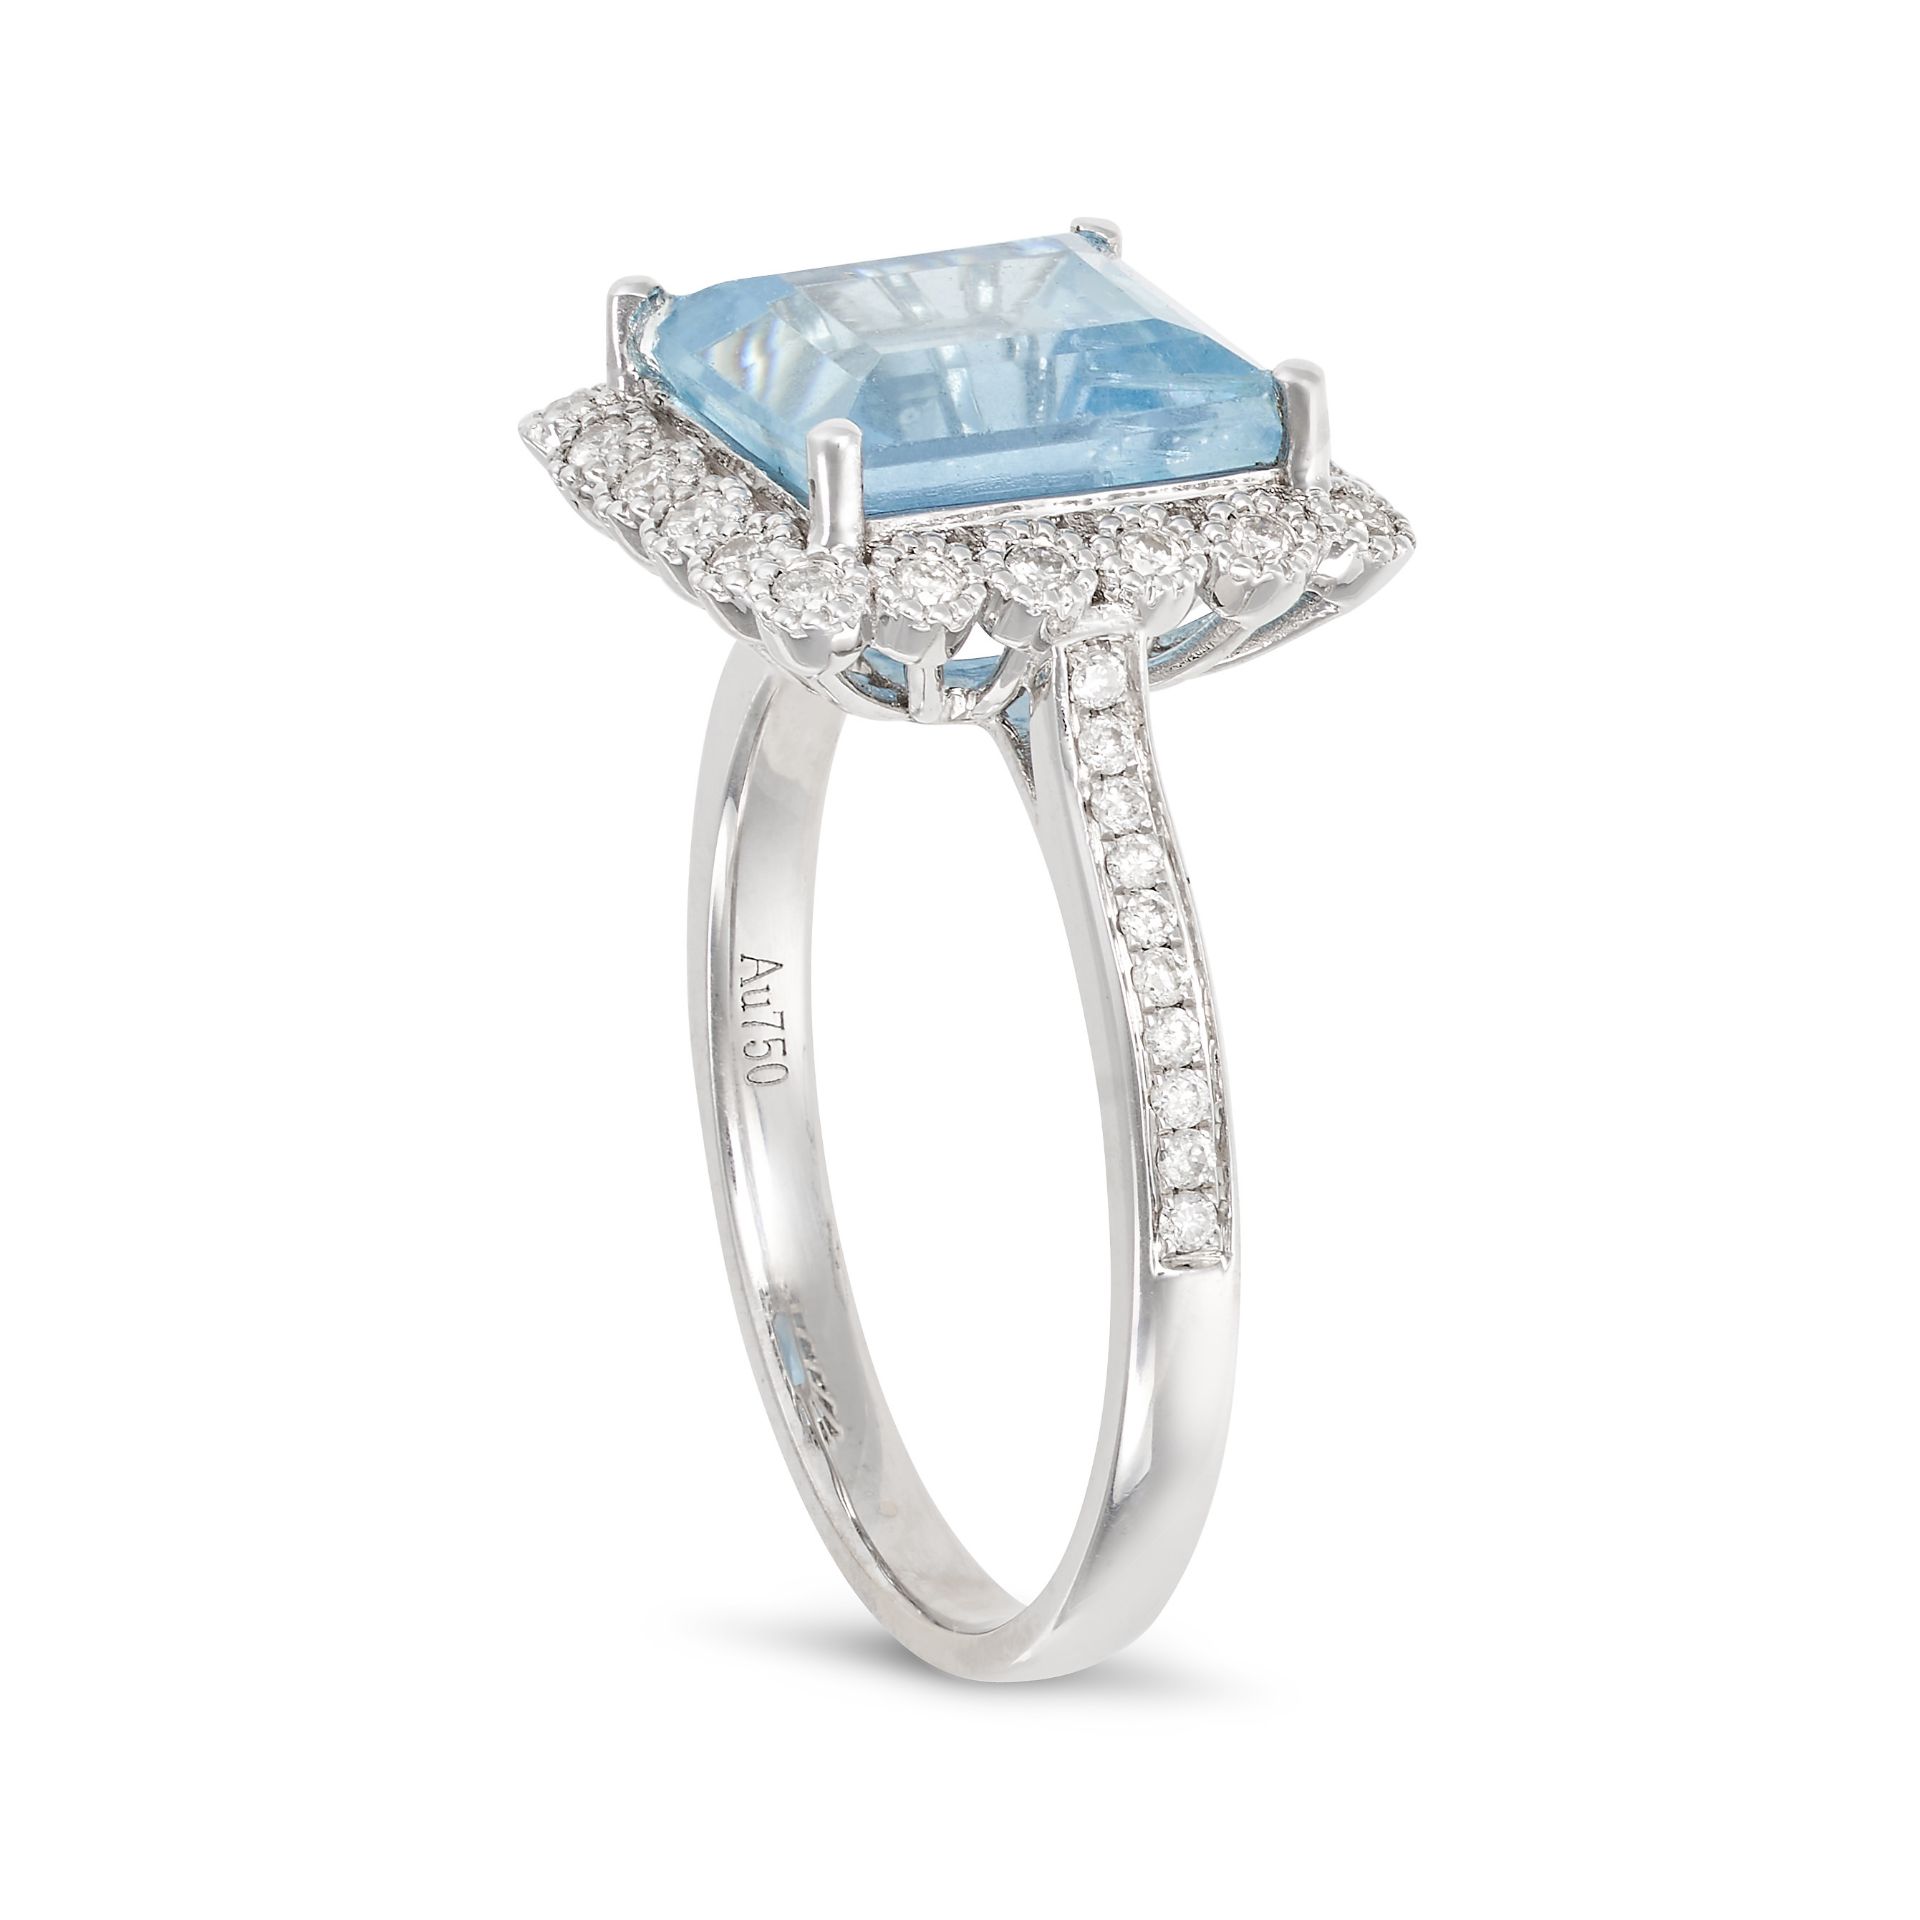 AN AQUAMARINE AND DIAMOND CLUSTER RING in 18ct white gold, set with a square step cut aquamarine ... - Image 2 of 2